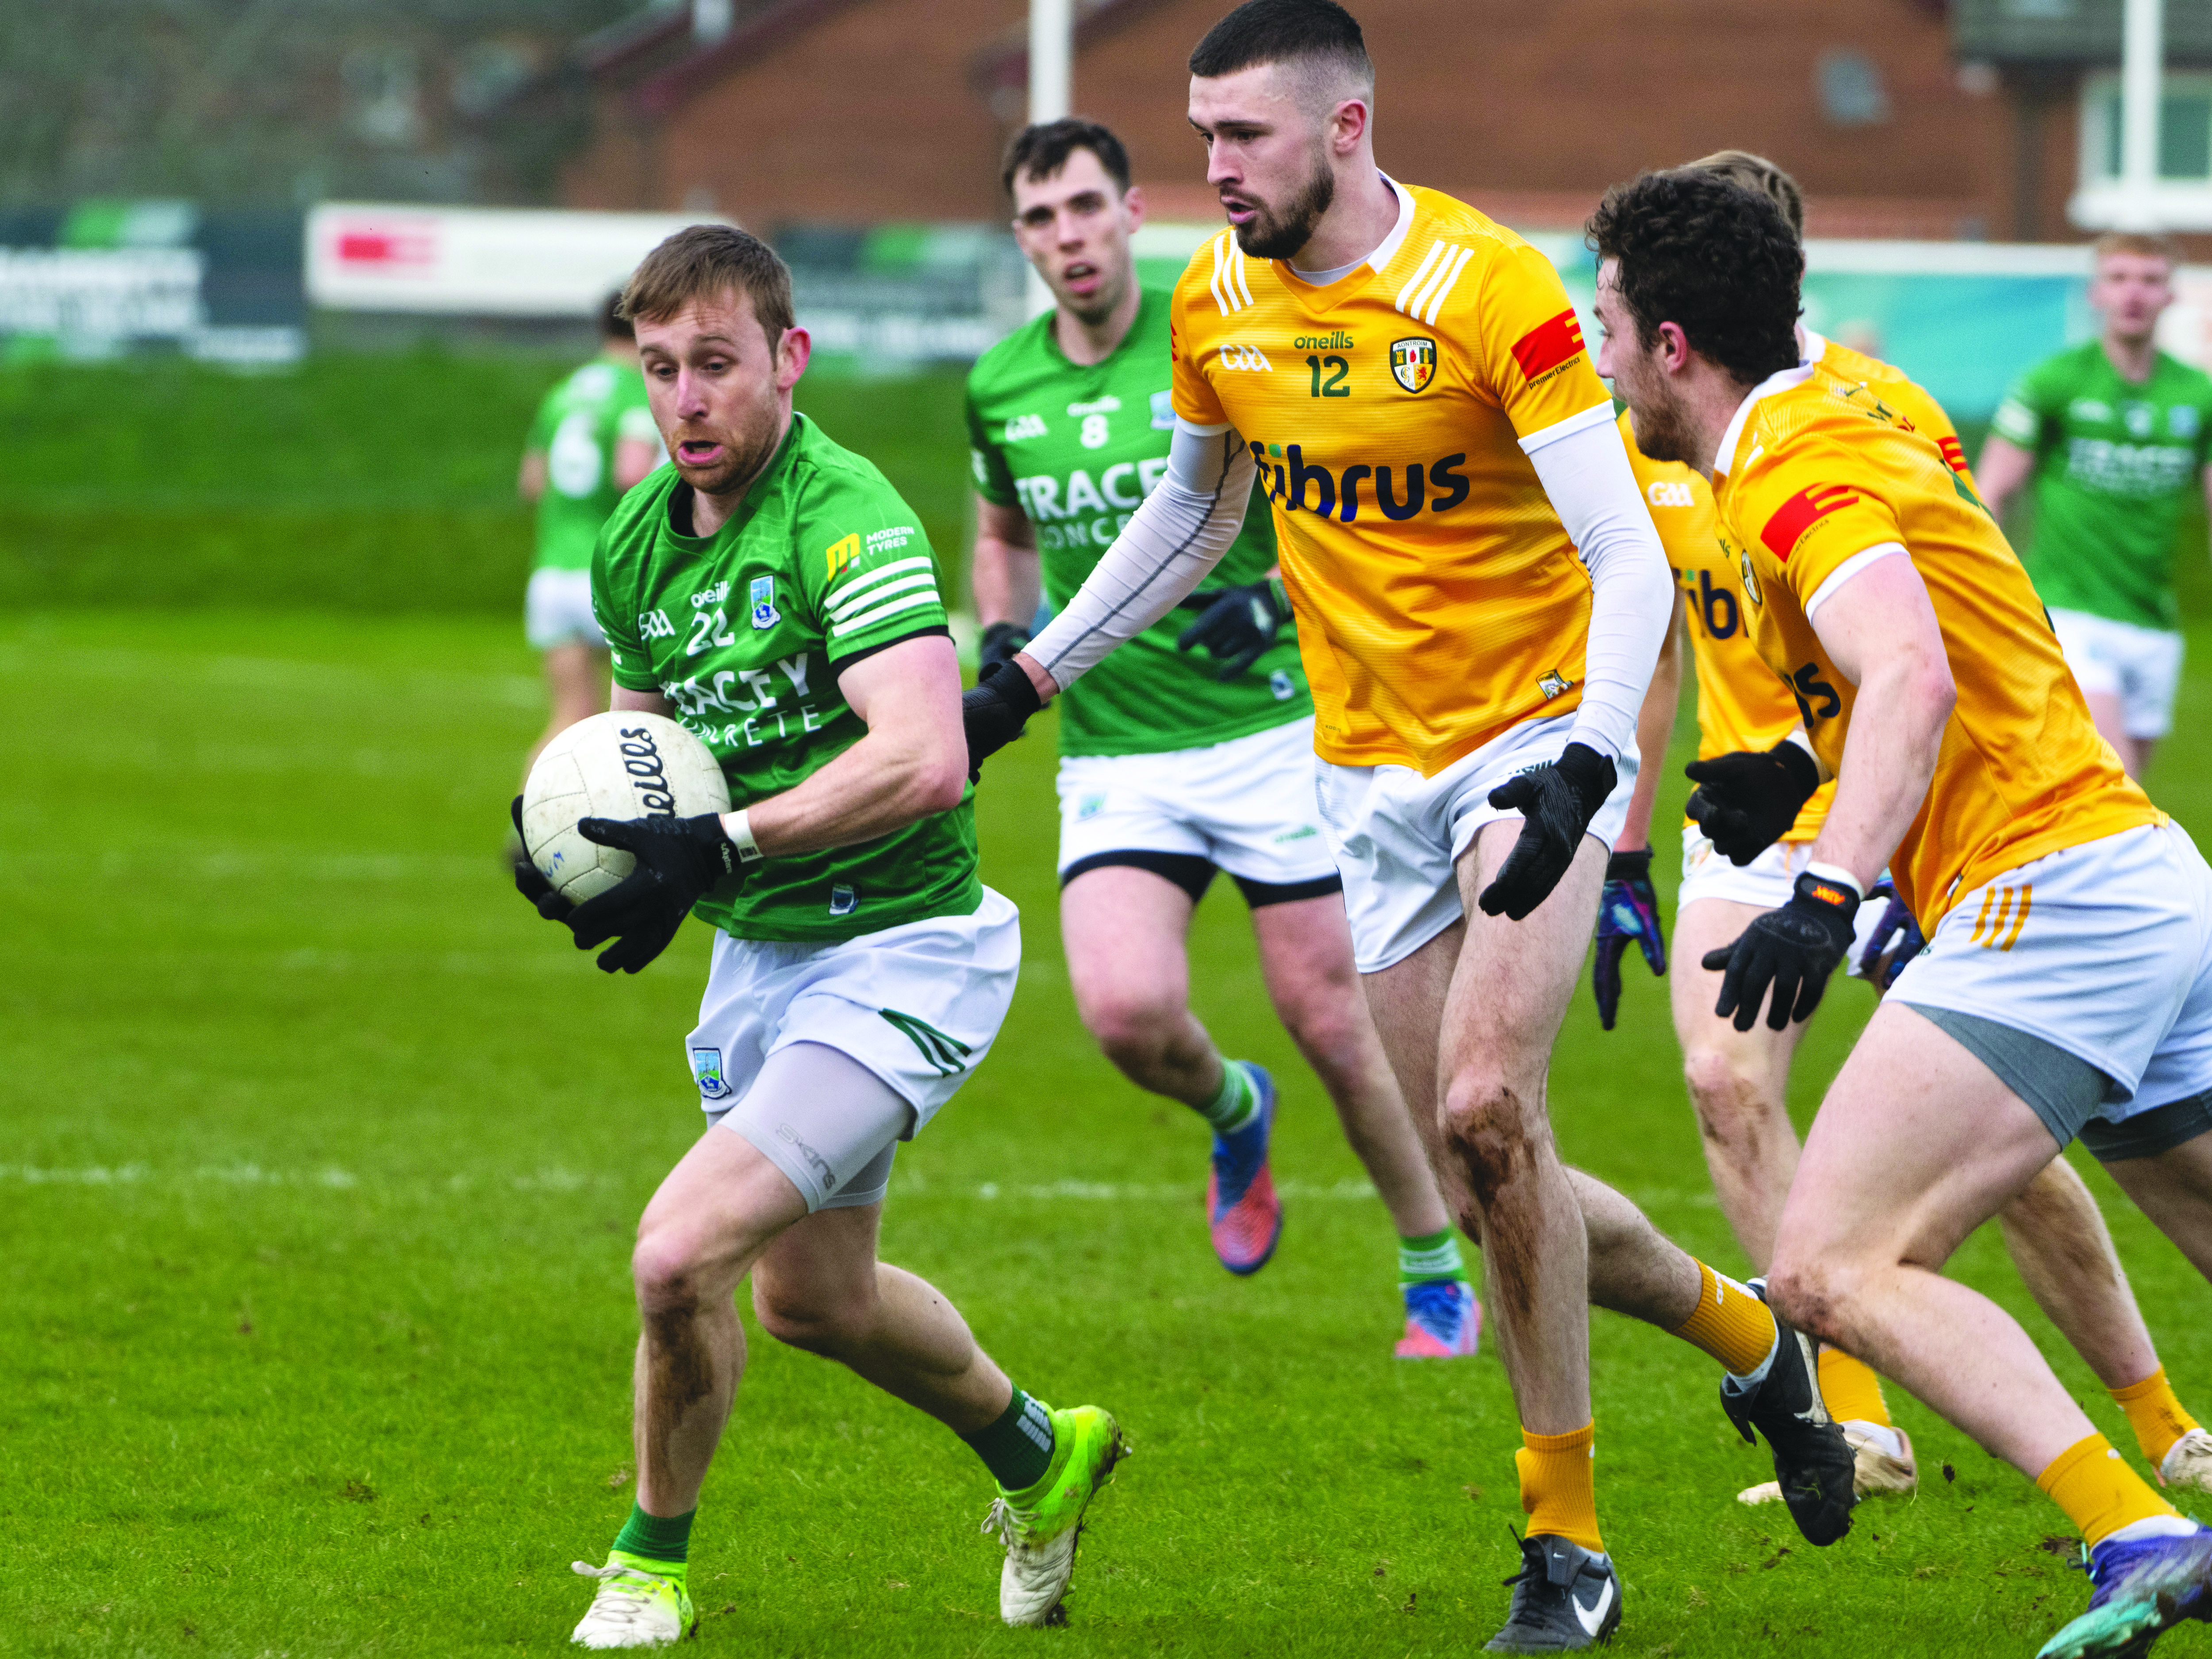 Fermanagh came from eight down to defeat Antrim in the League in February, so the Saffrons will be keen to flip the script in Armagh on Sunday